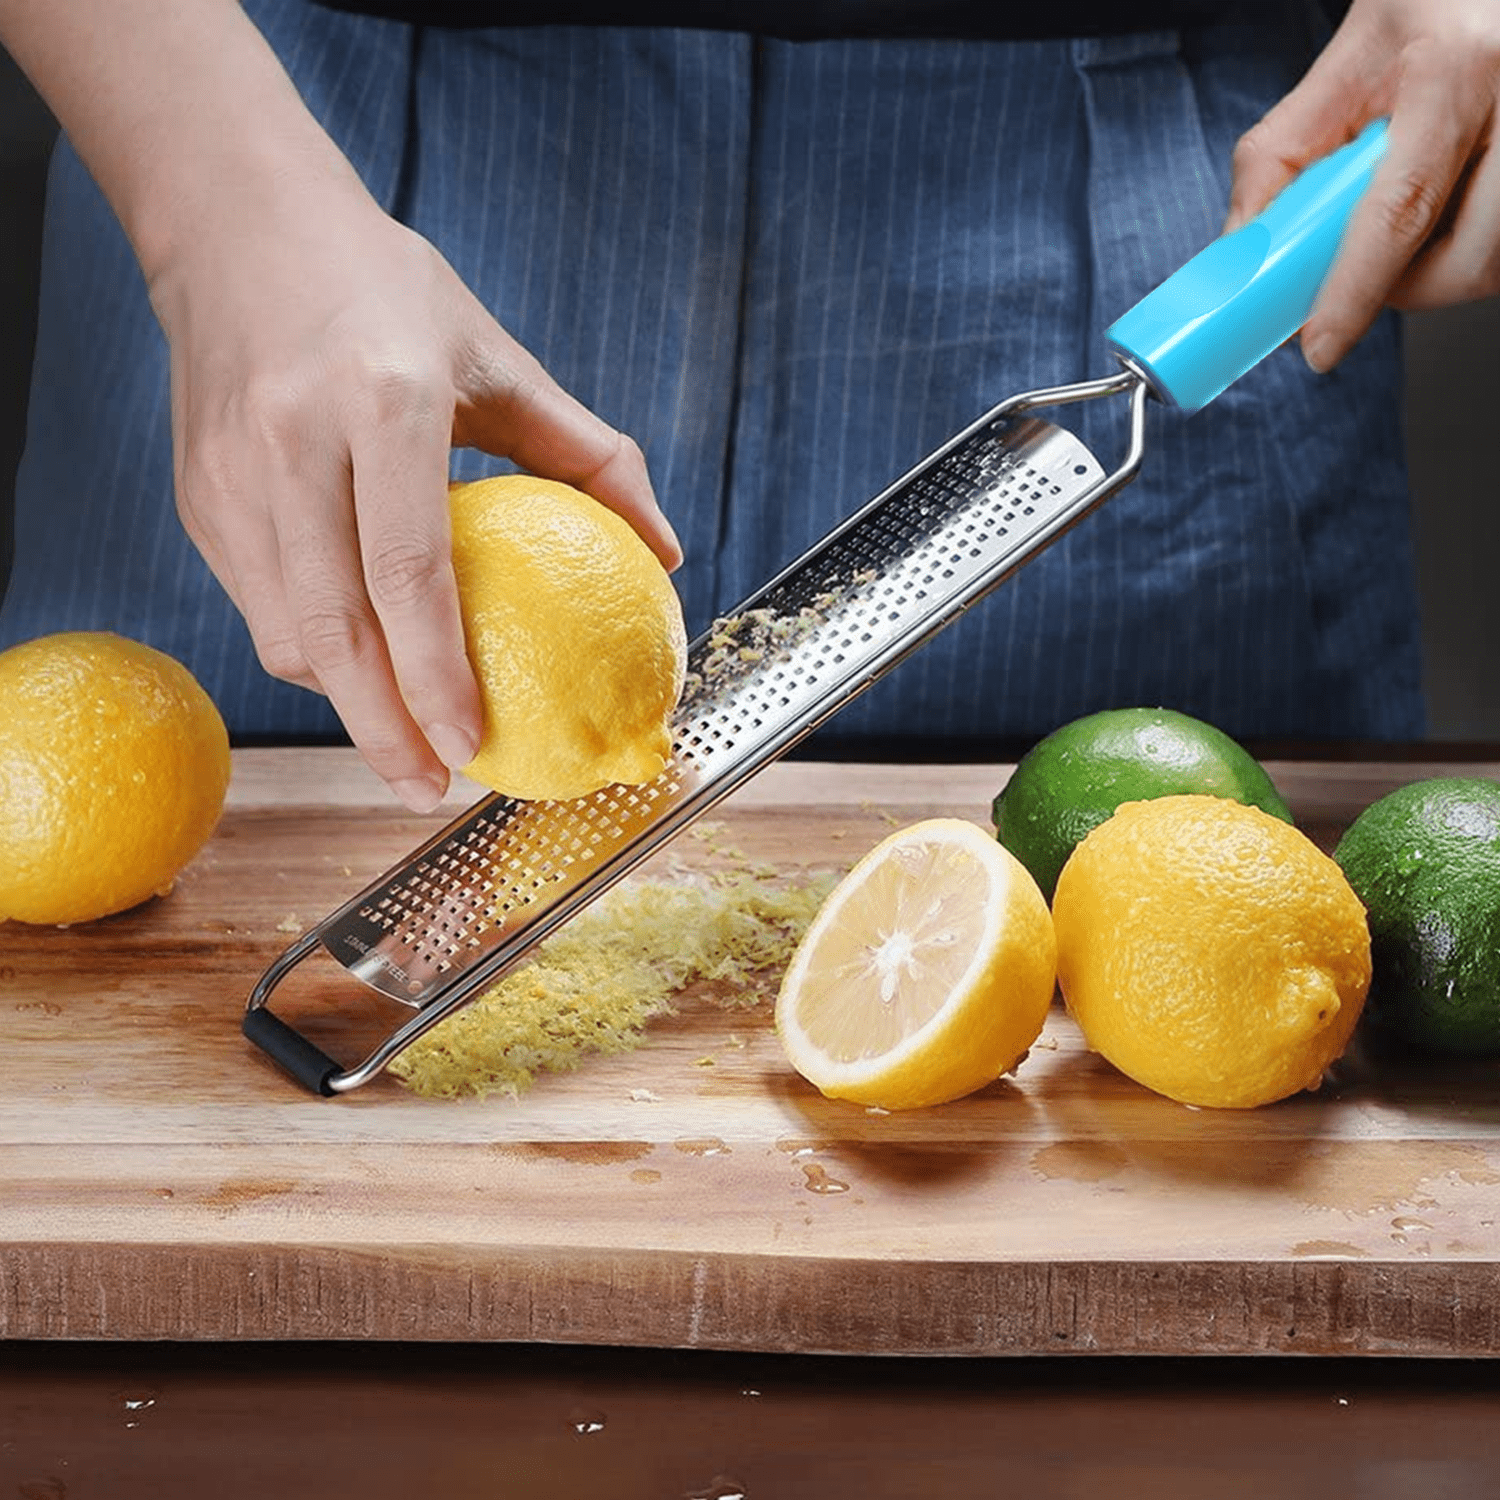 Cheese Grater - Stainless Steel Lemon Grater Tool - Kitchen Grater - Handheld  Cheese Grater - Chocolate, Coconut, Ginger, Lemon Grater - Citrus Grater  (Red) 